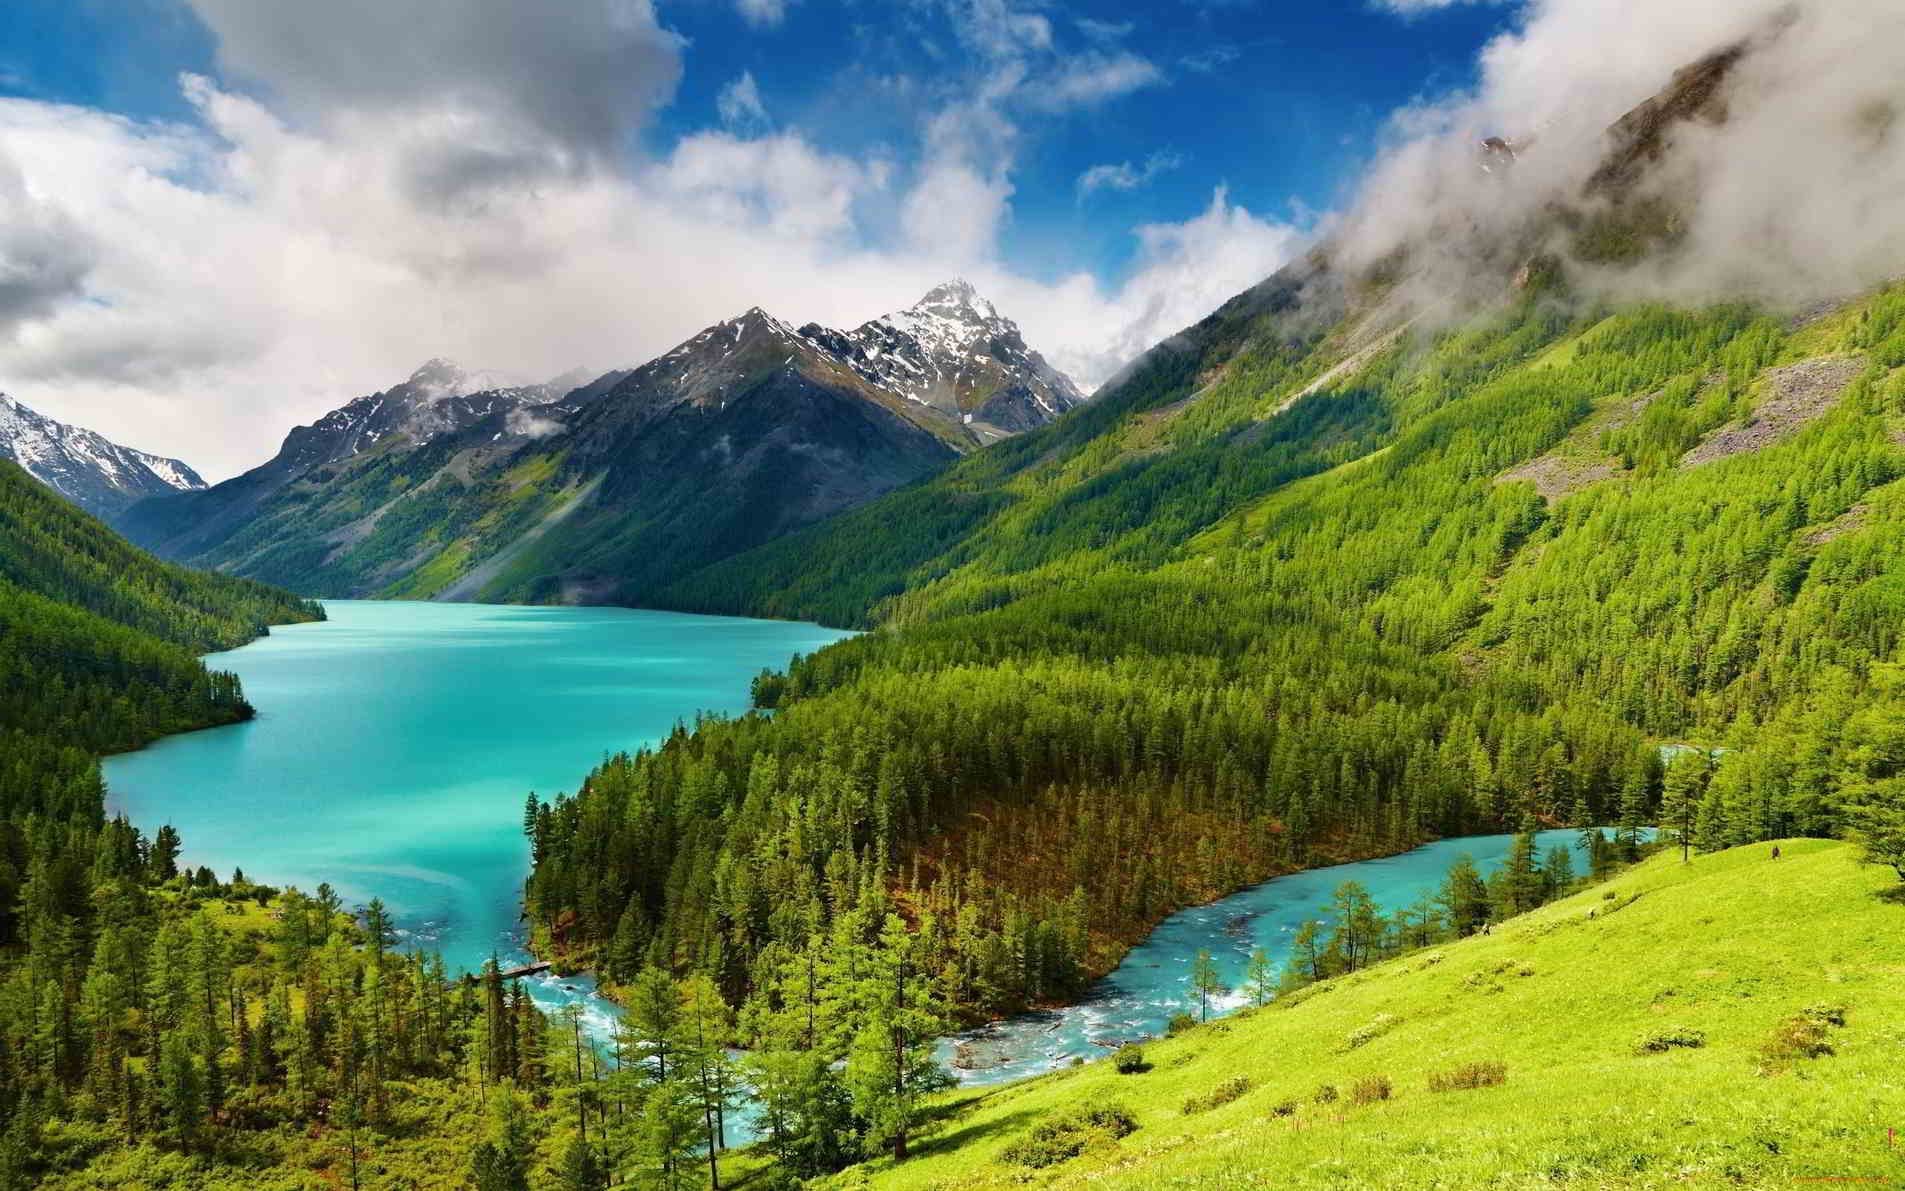 Altai and its foreign kingdom